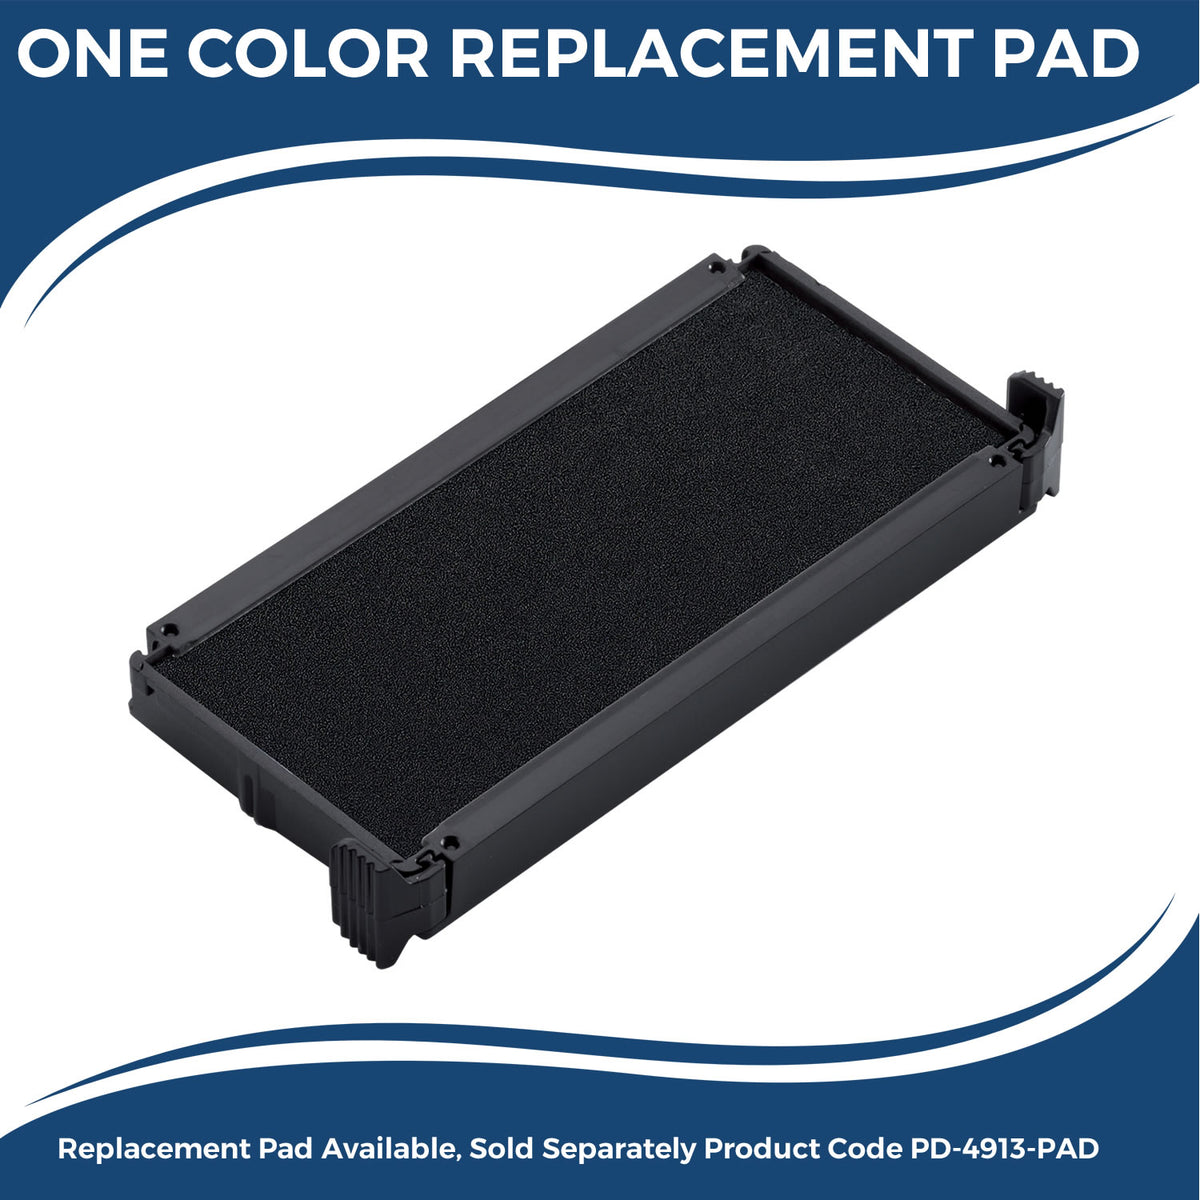 Large Self-Inking Archivar Stamp 5556S Large Replacment Pad